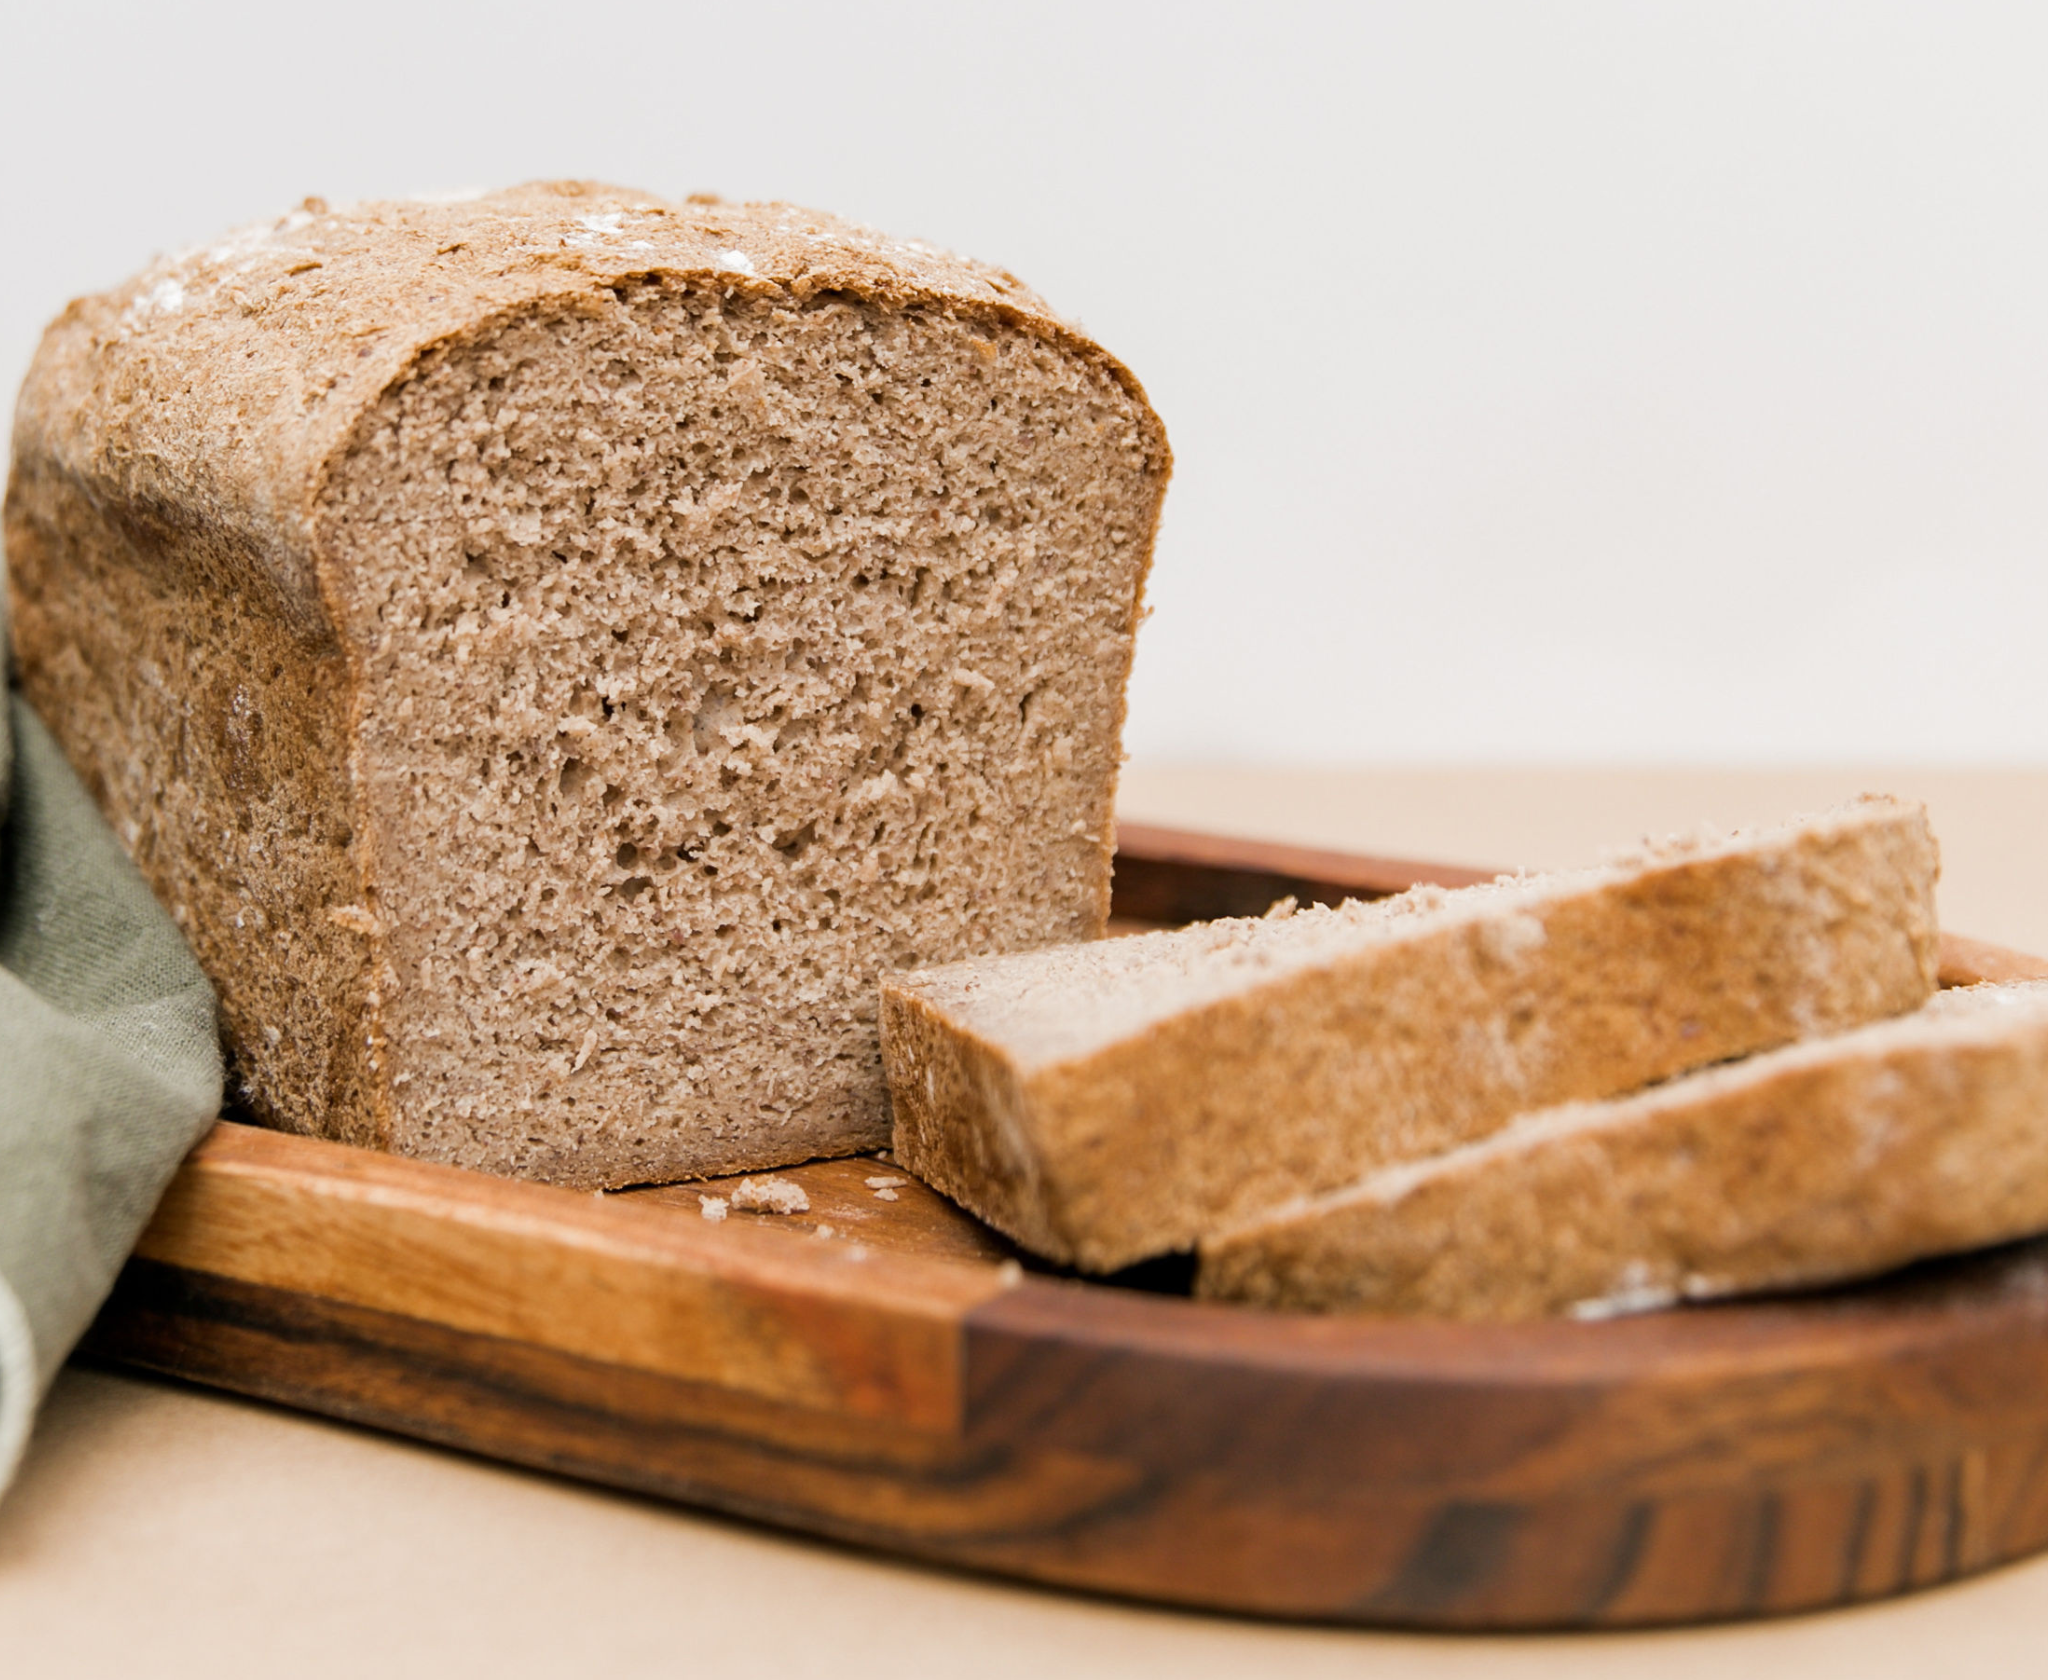 Gluten free bread sliced to perfection